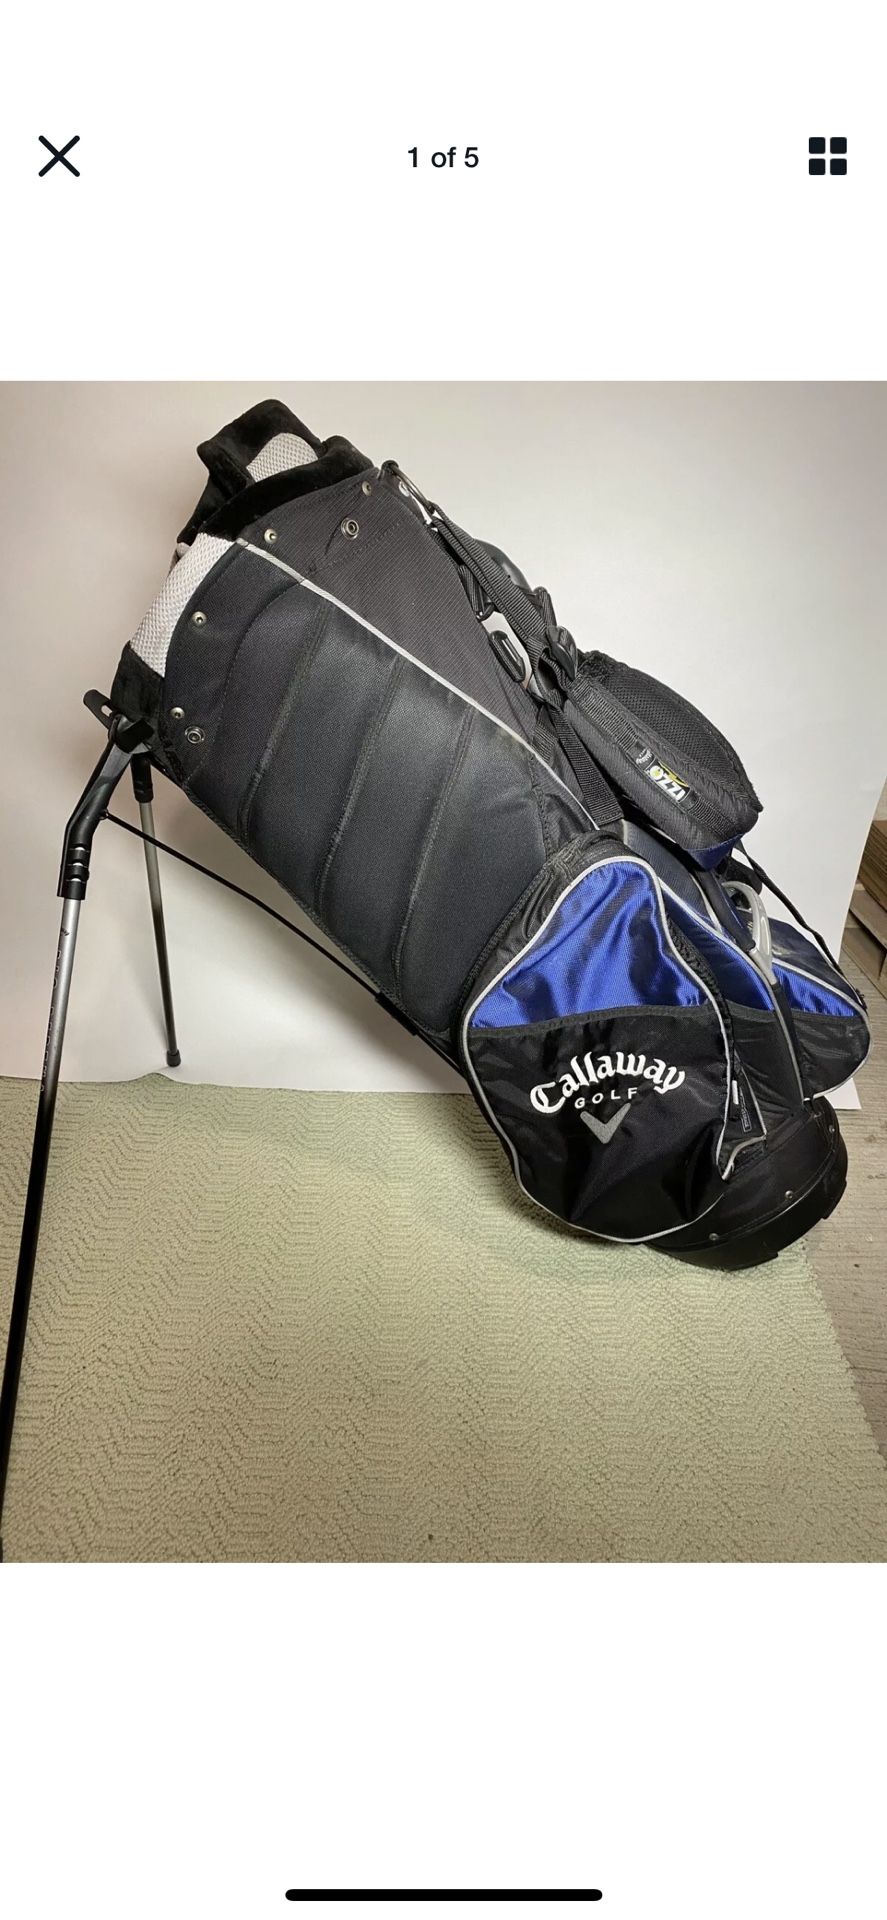 Callaway 8 Way Blue & Black Golf Cart Bag w/ Stand & Backpack Strap- Used